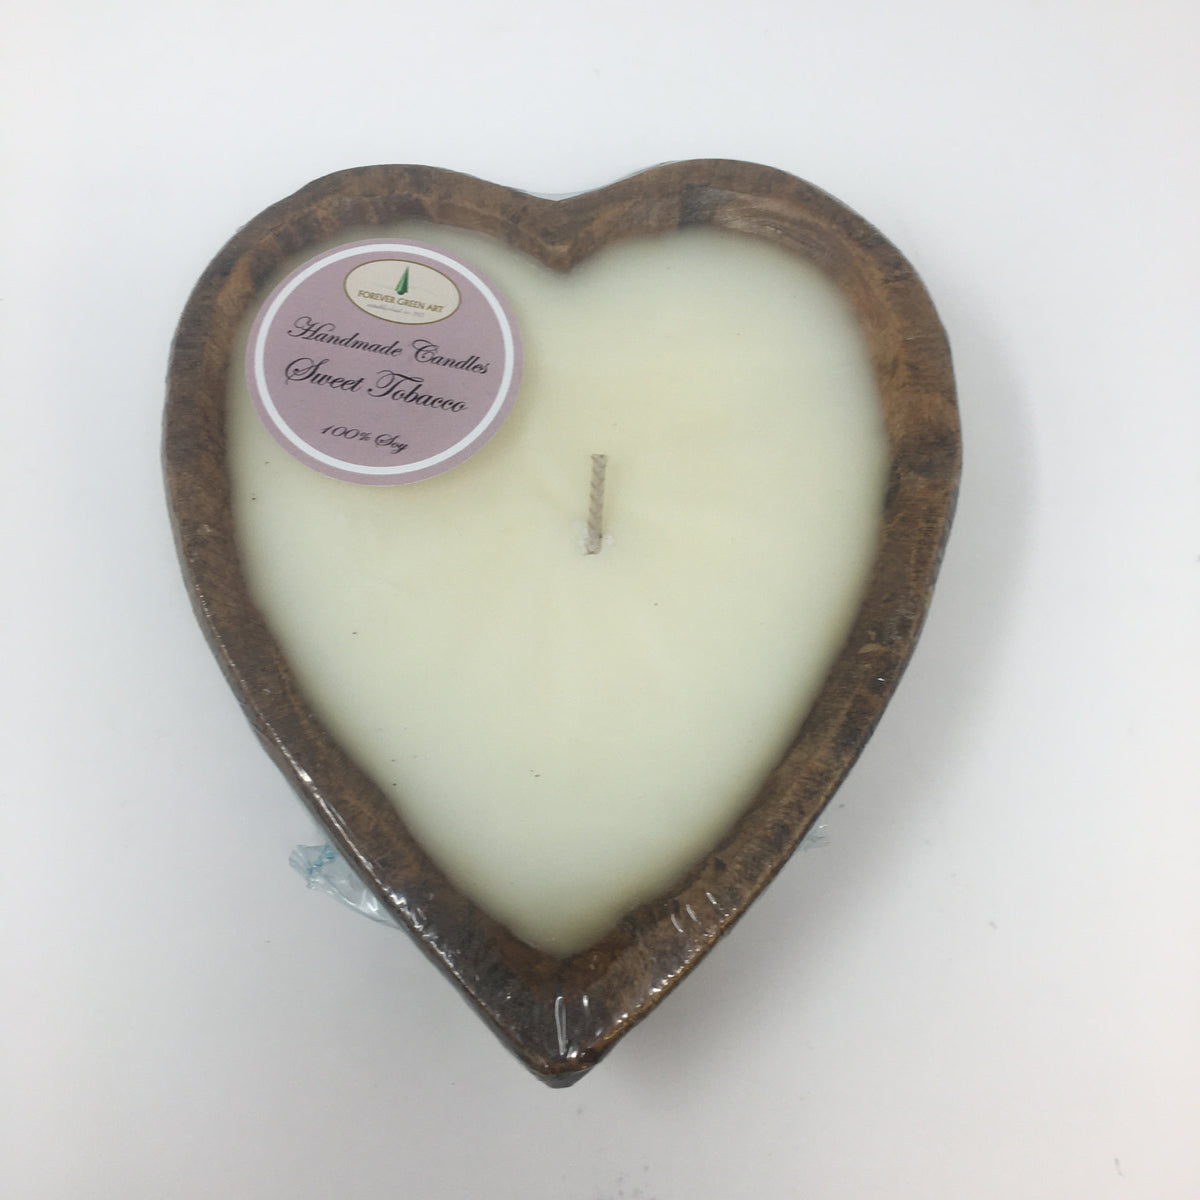 FINAL SALE MSG Sweet Heart Bowl Candle